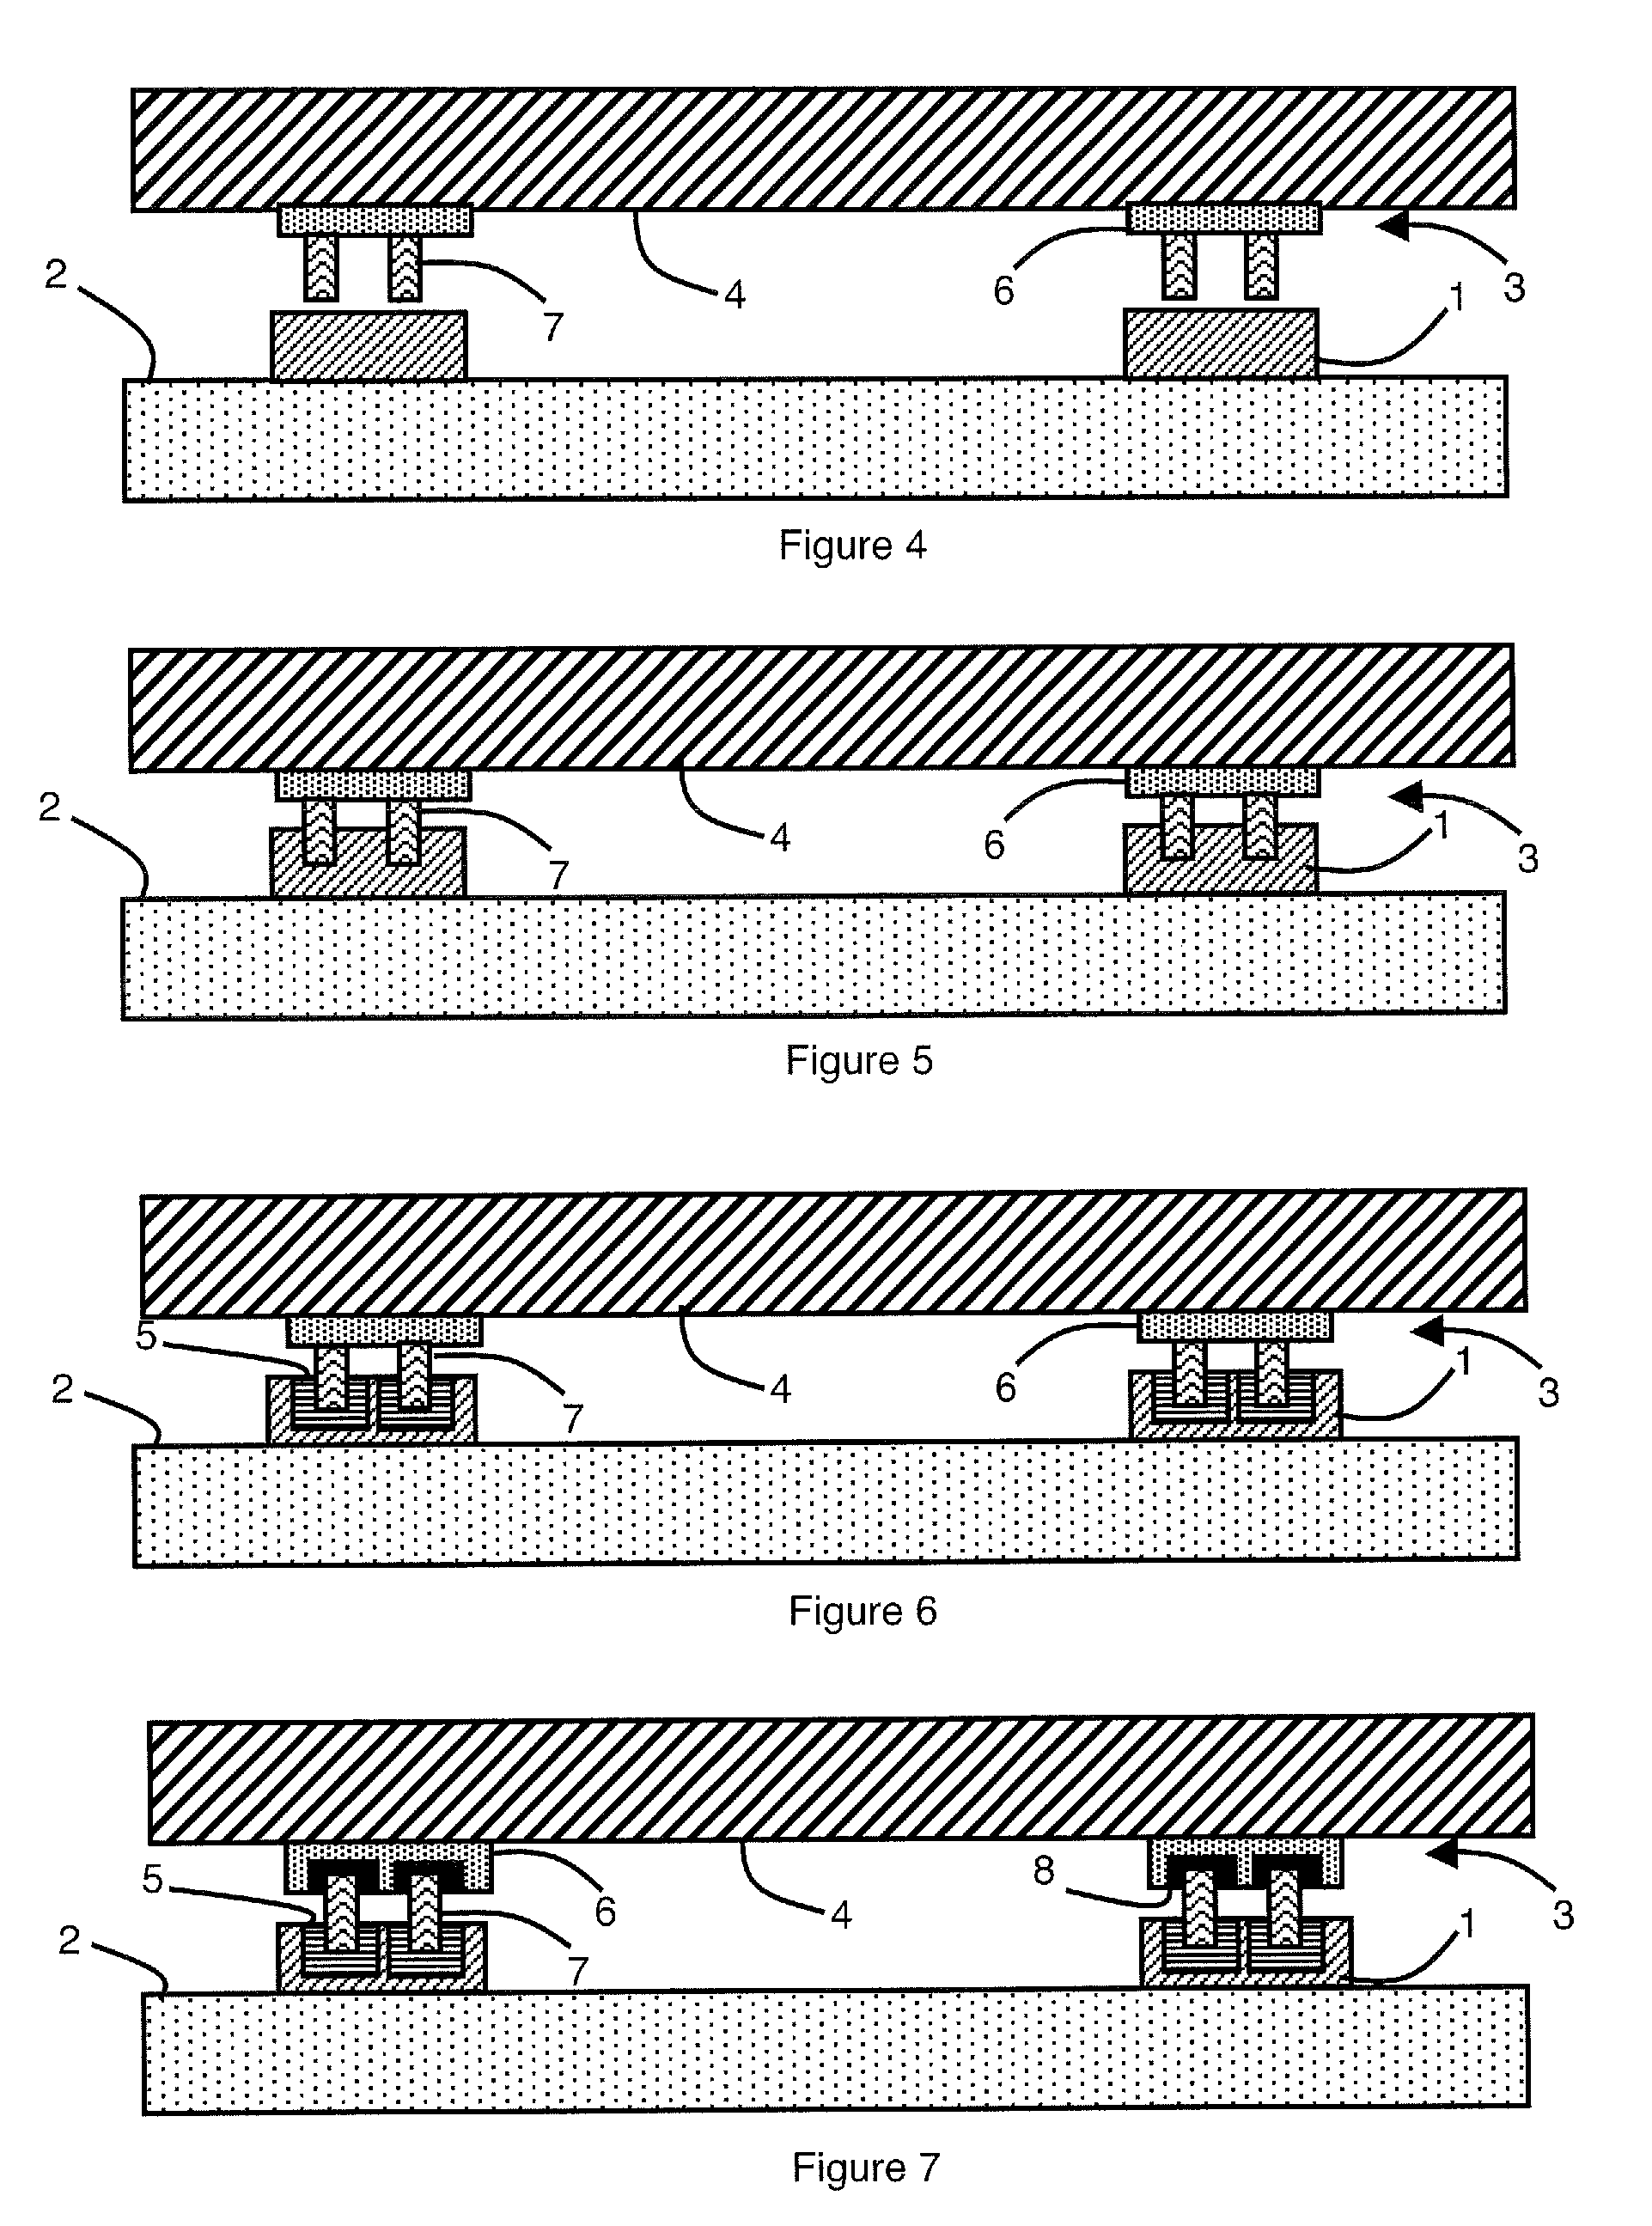 Method for fabricating two substrates connected by at least one mechanical and electrically conductive connection and structure obtained